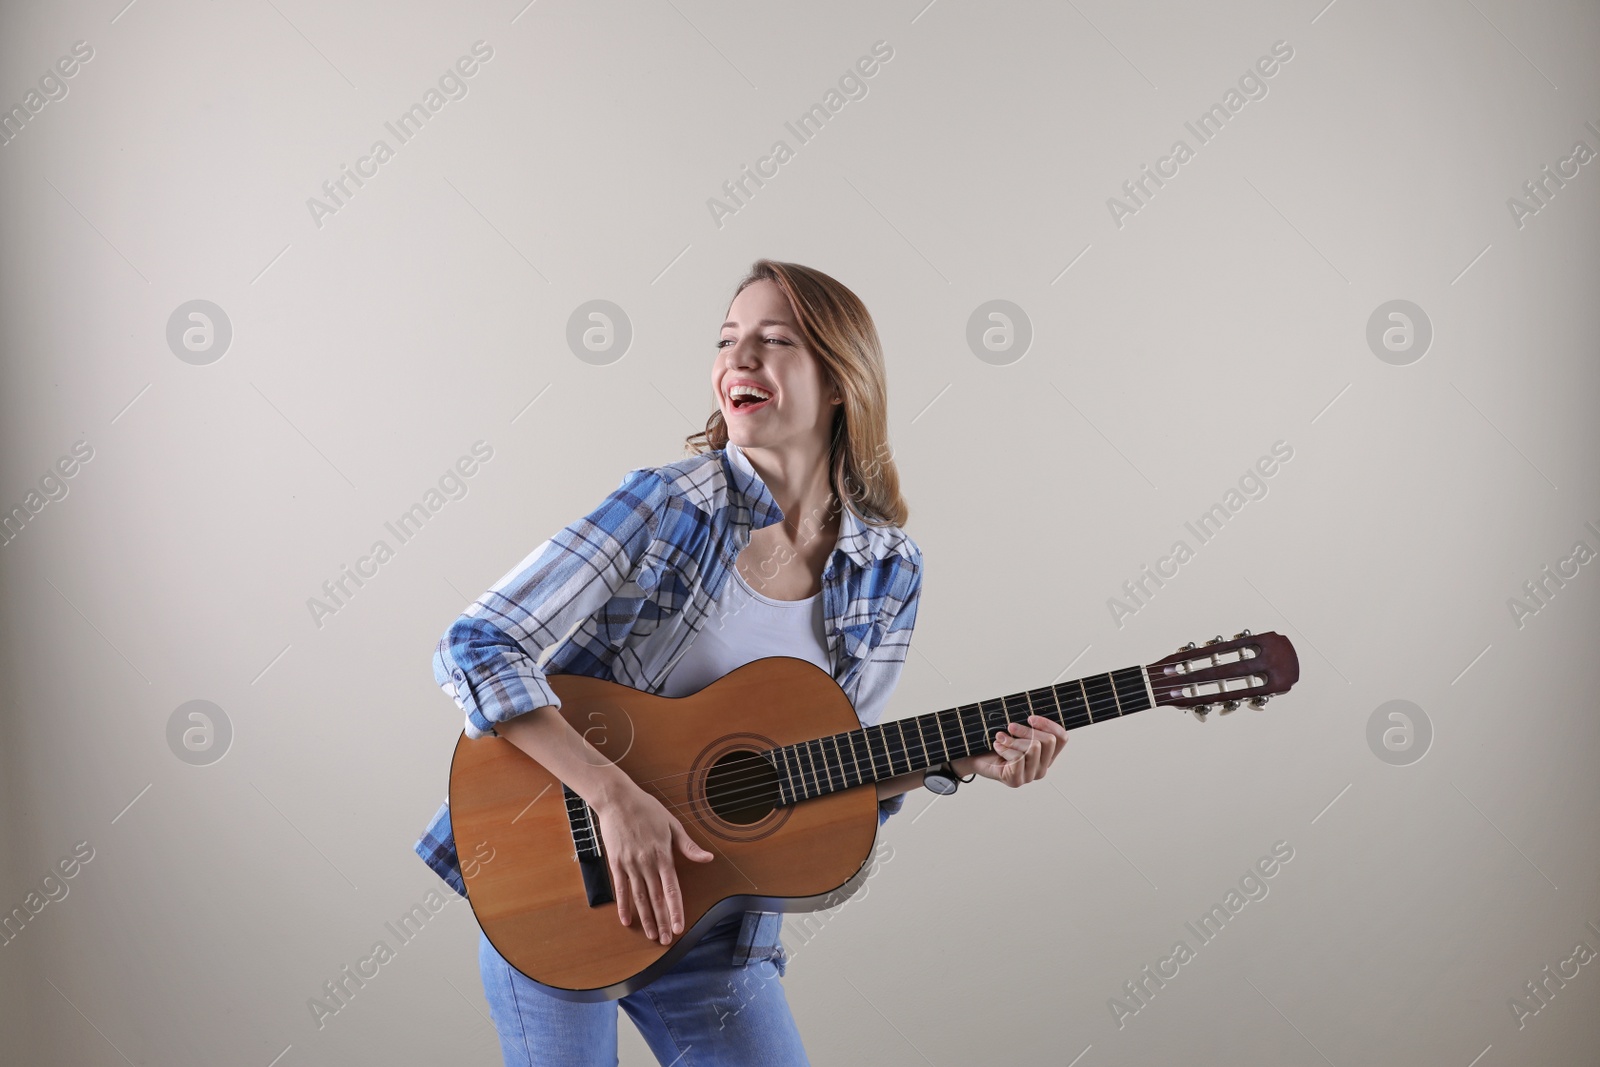 Photo of Young woman playing acoustic guitar on grey background